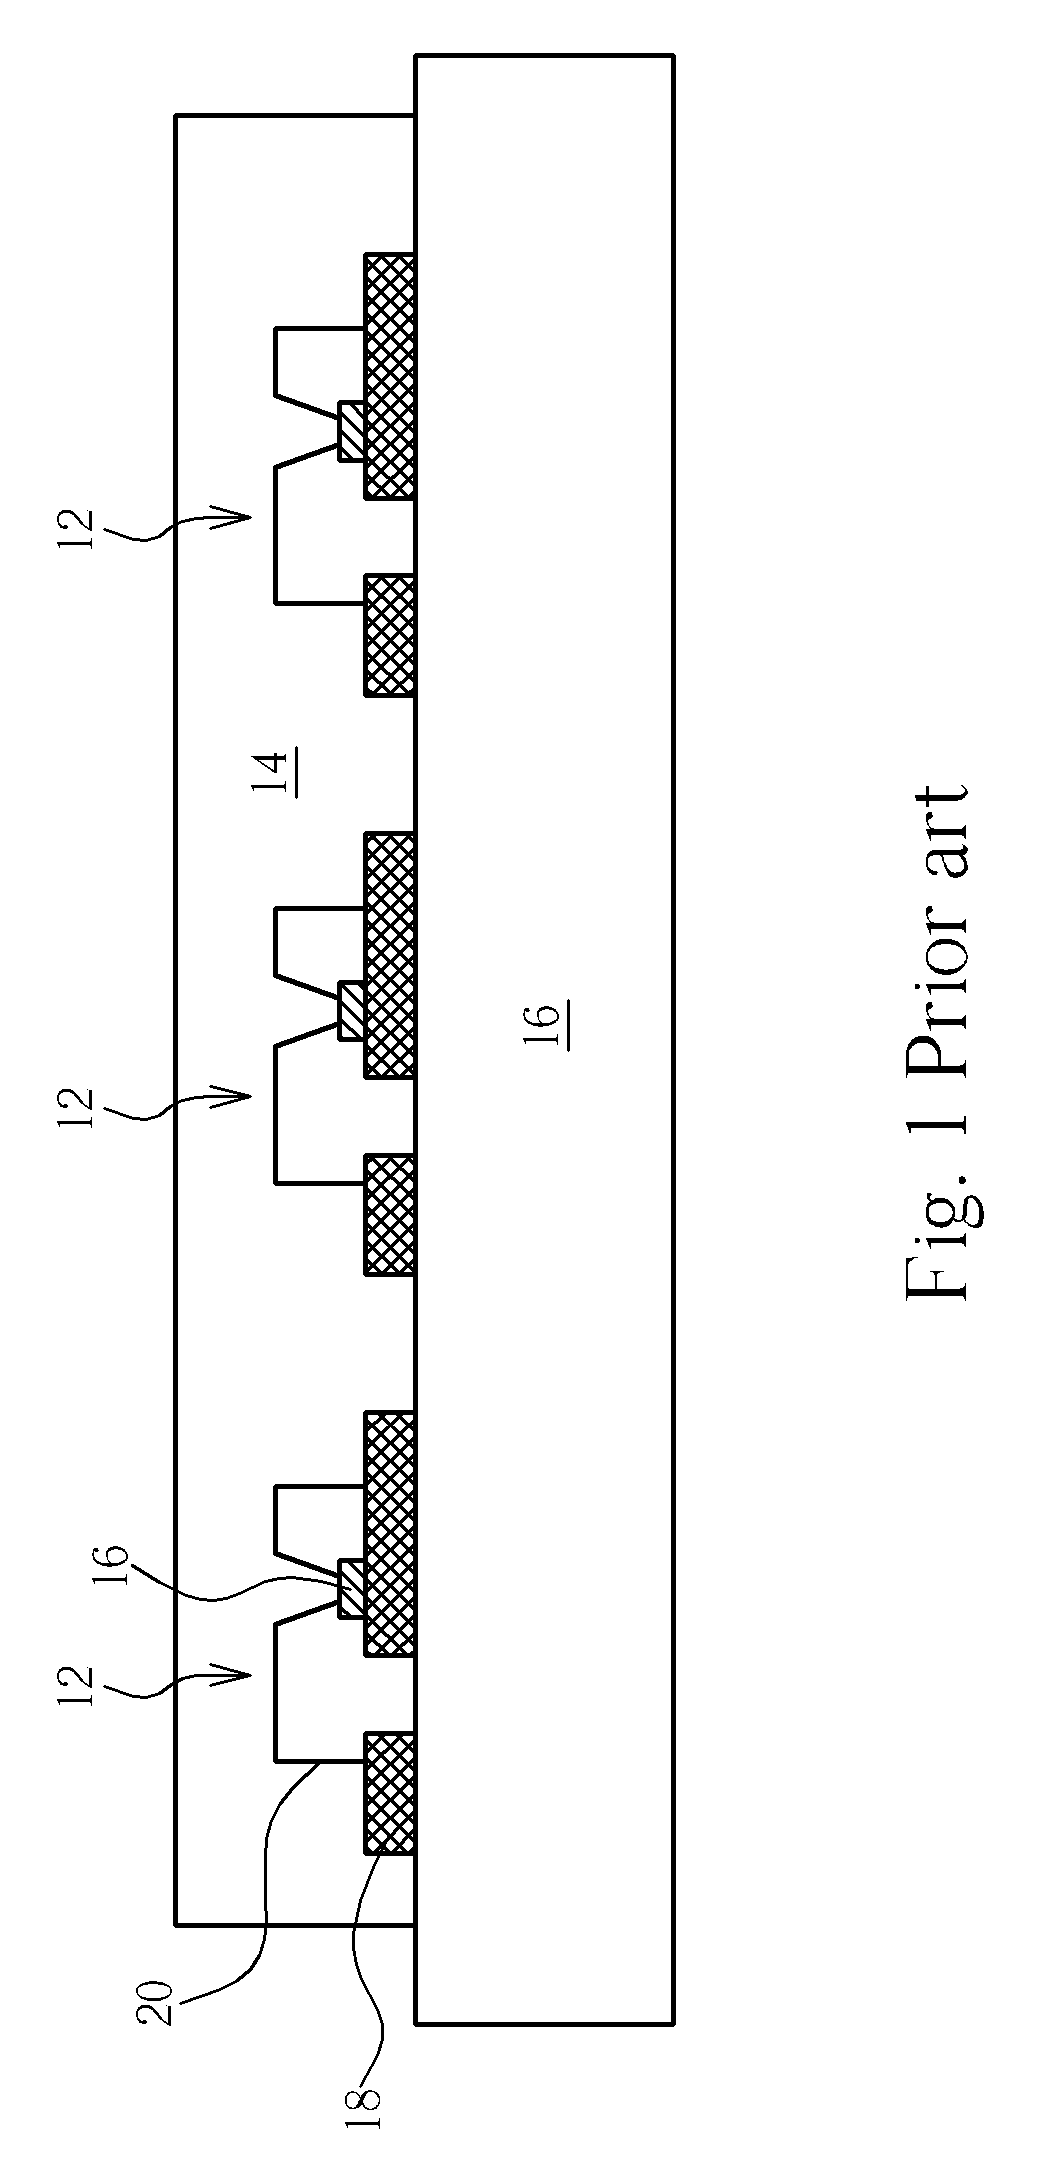 LED module and method of packaging the same